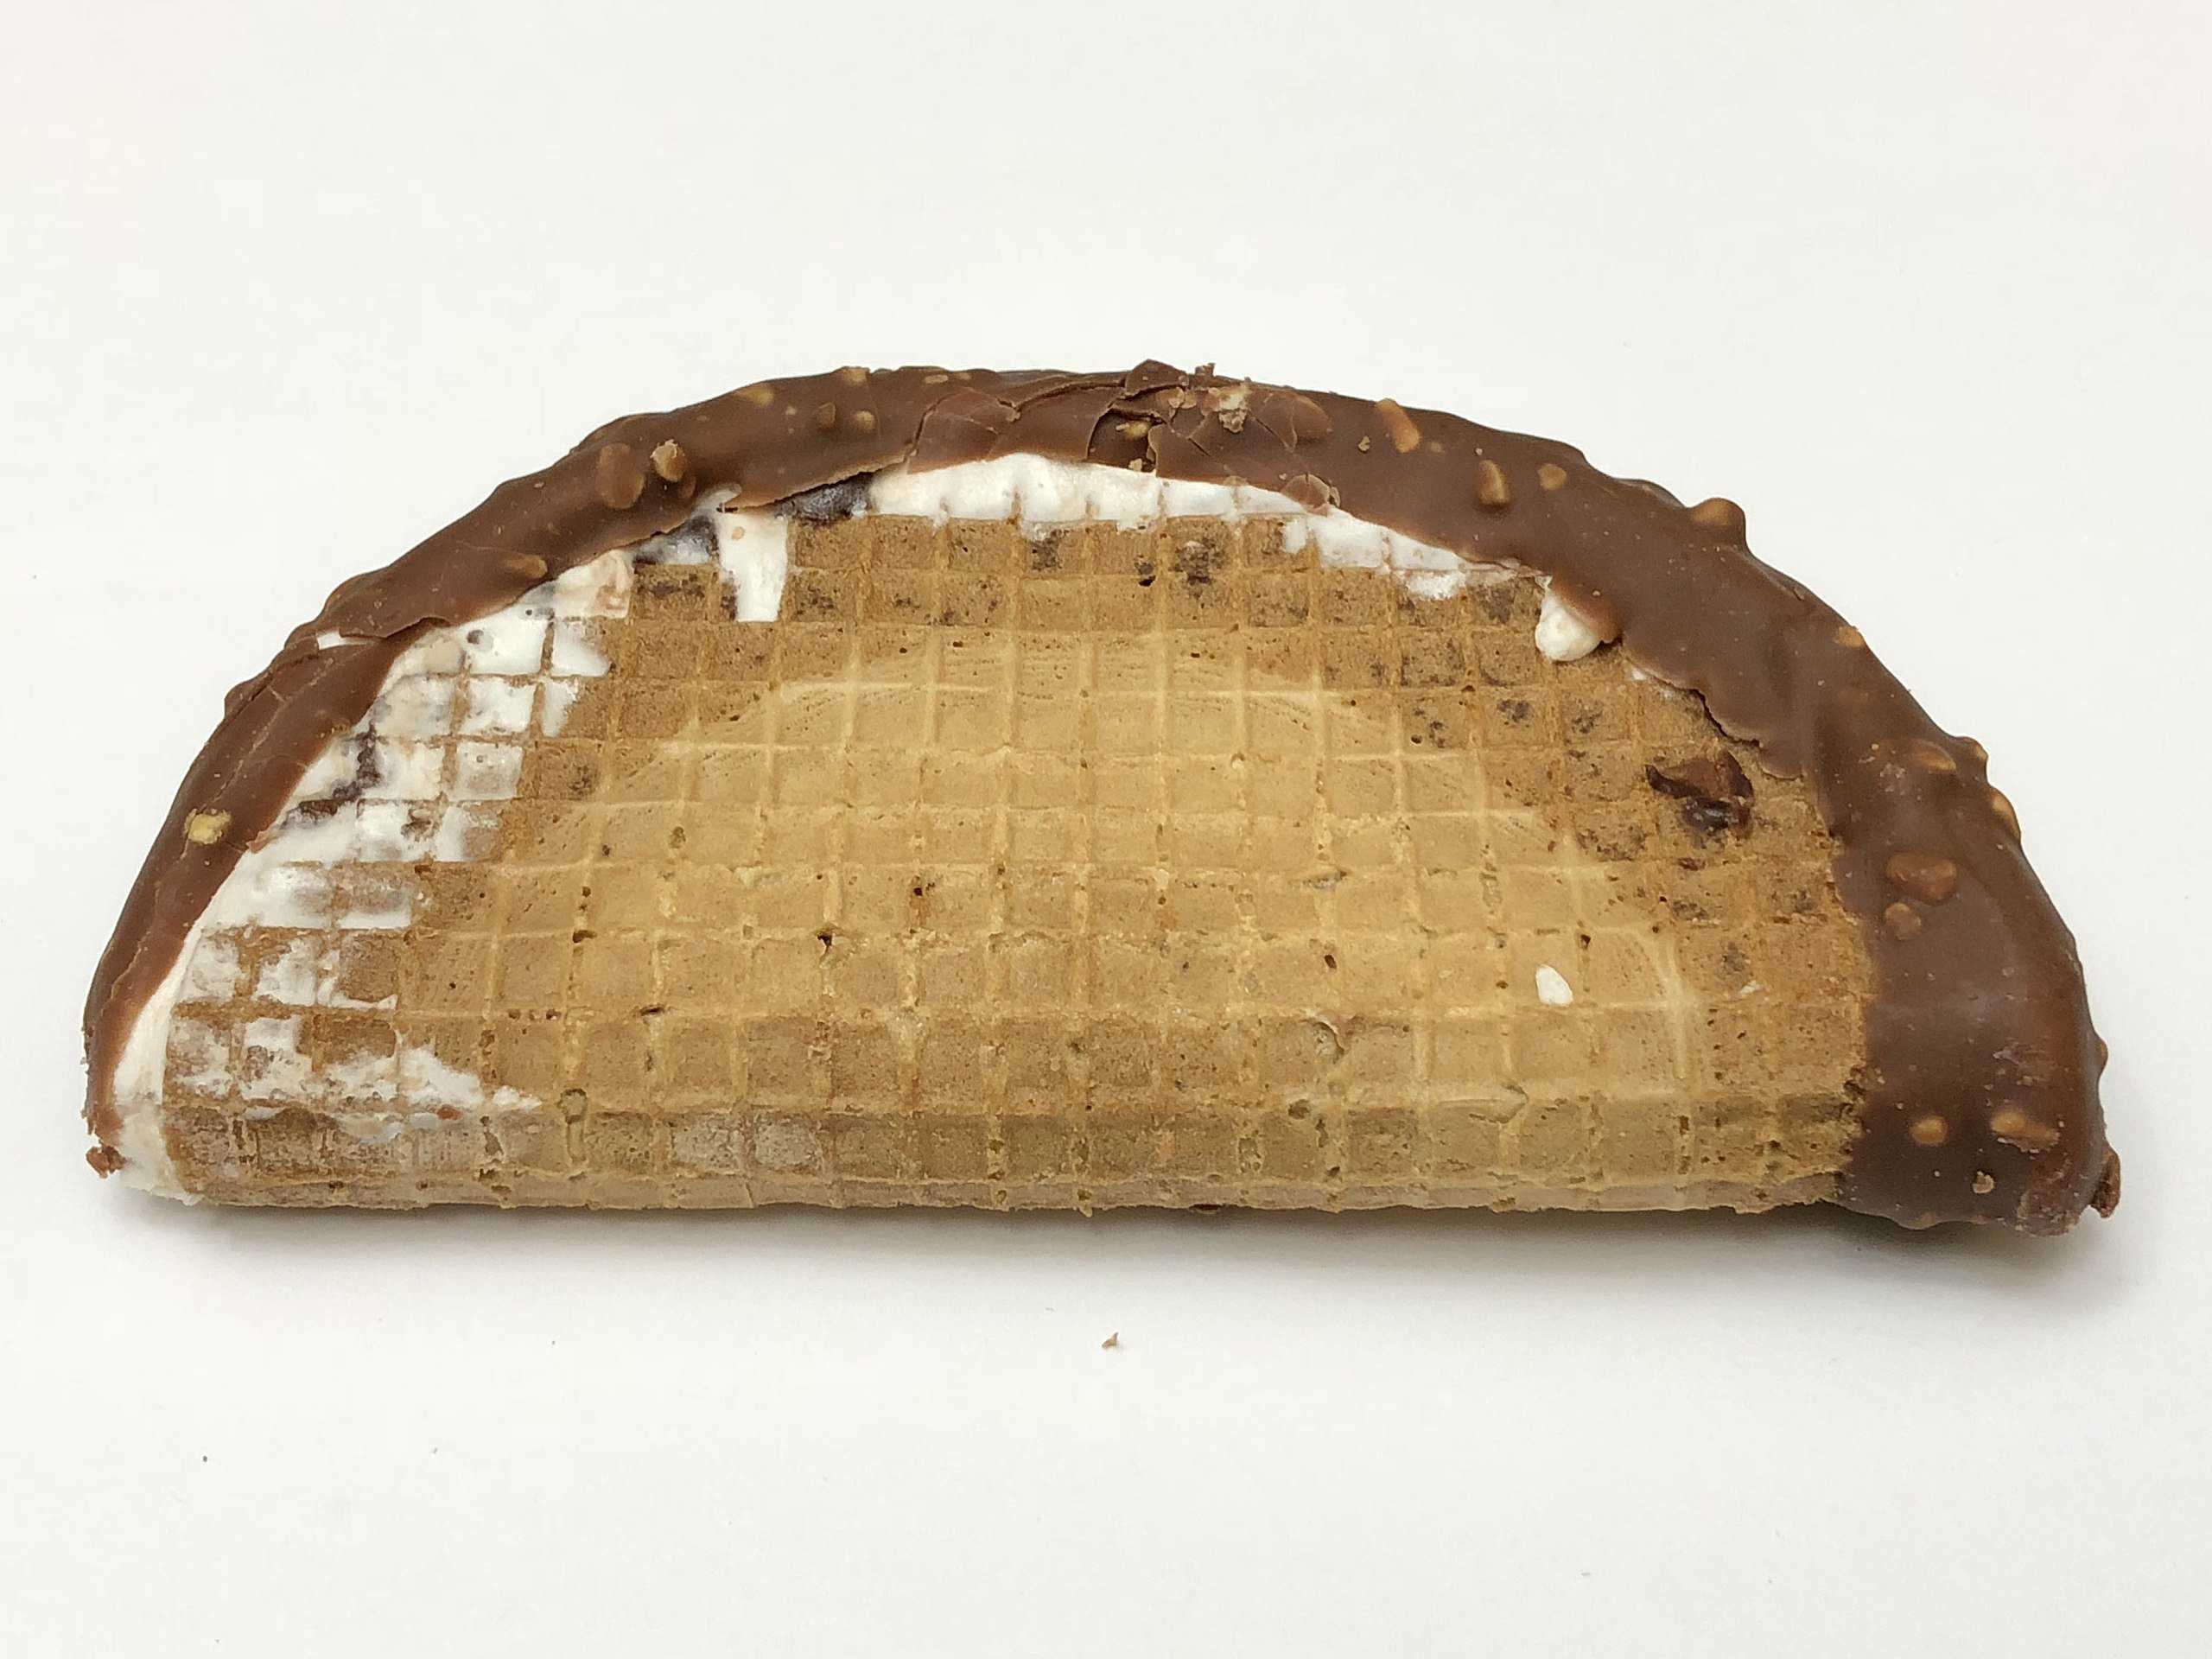 An unwrapped Choco Taco in the Franklin Farm section of Oak Hill, Fairfax County, Virginia by Famartin